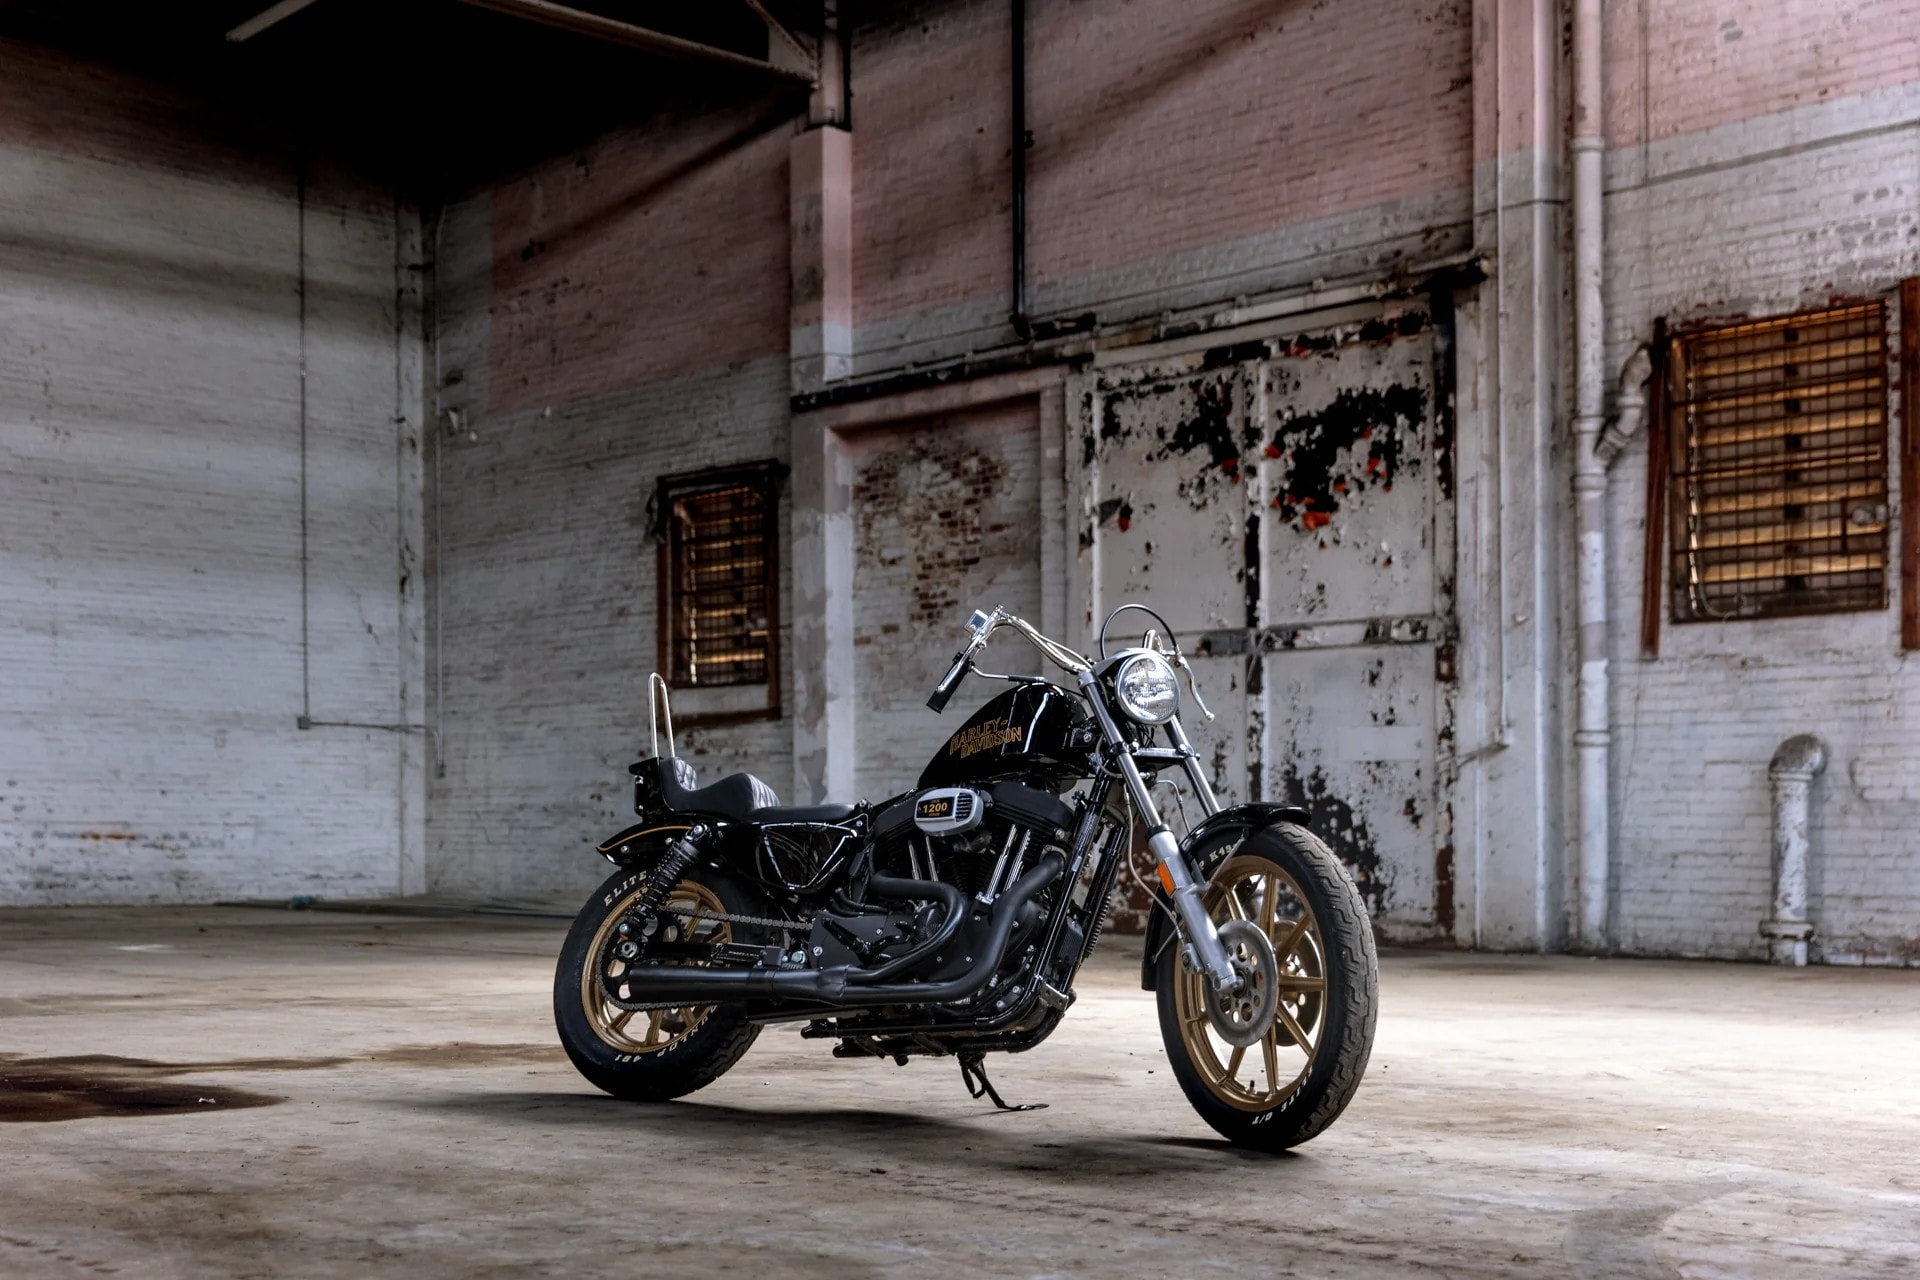 Harley Davidson Sportster 1200 Custom. Queen of the streets